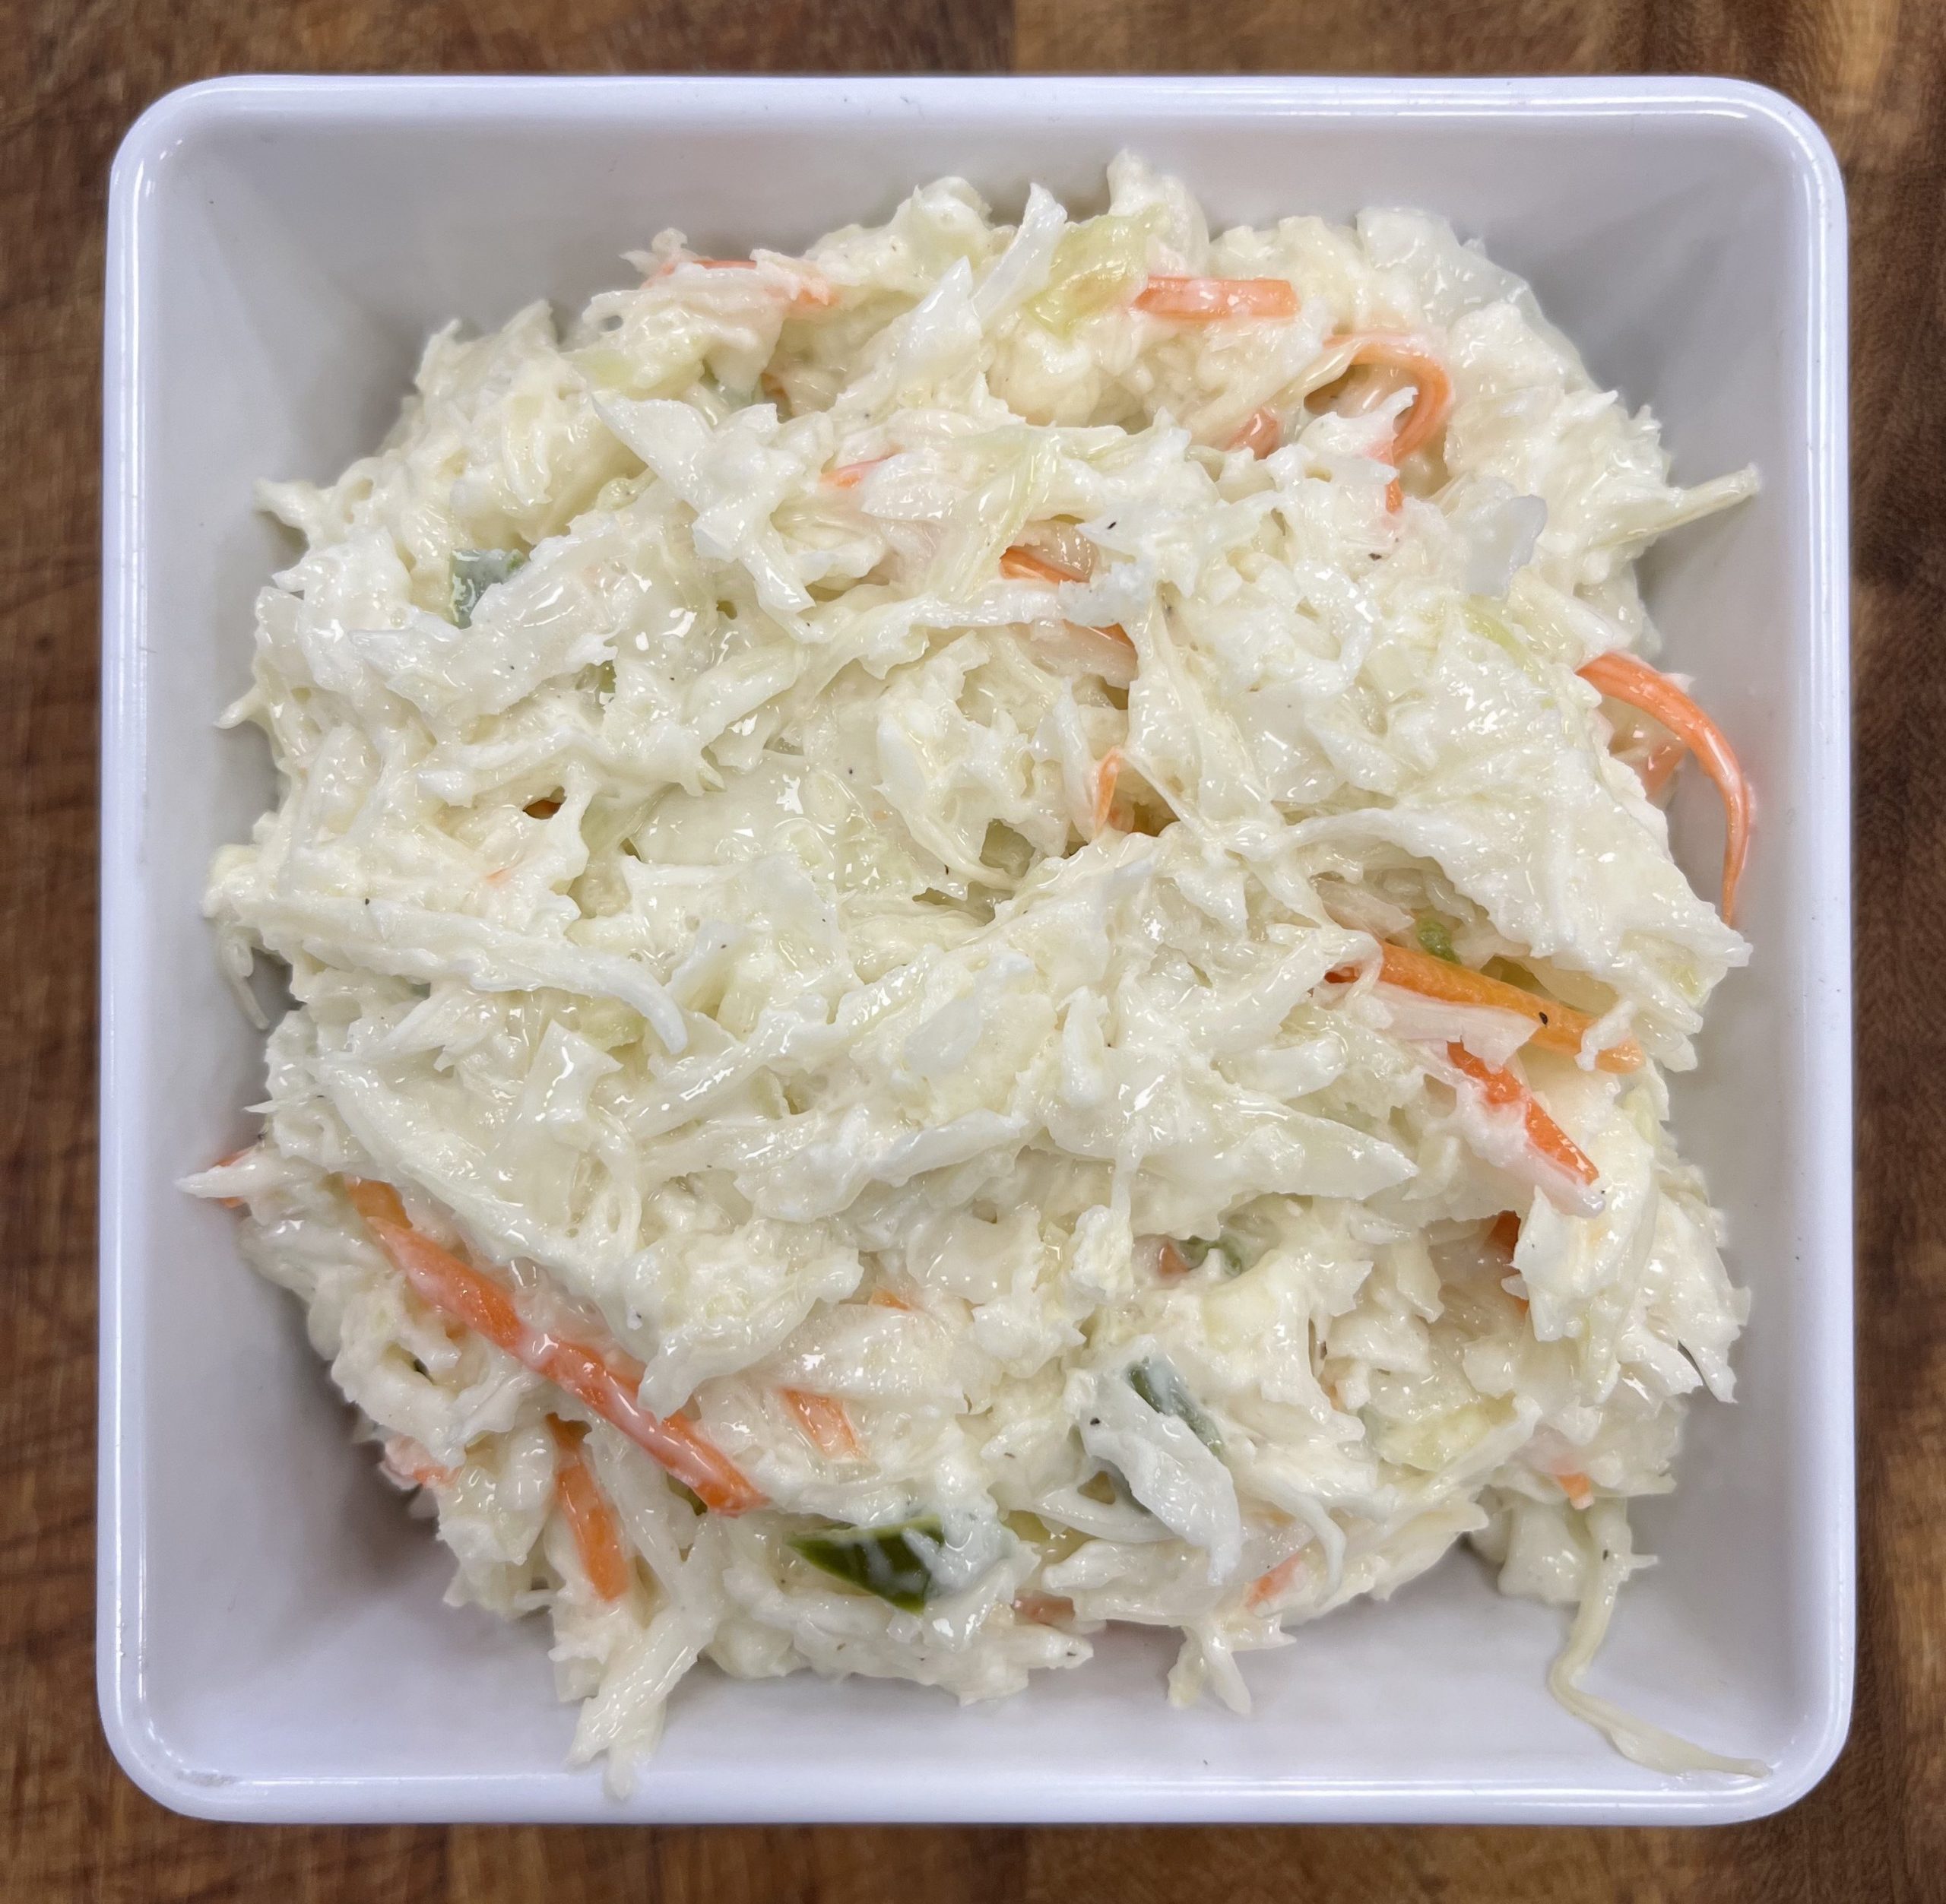 Homestyle Coleslaw. Light and refreshing. Serve at your next BBQ